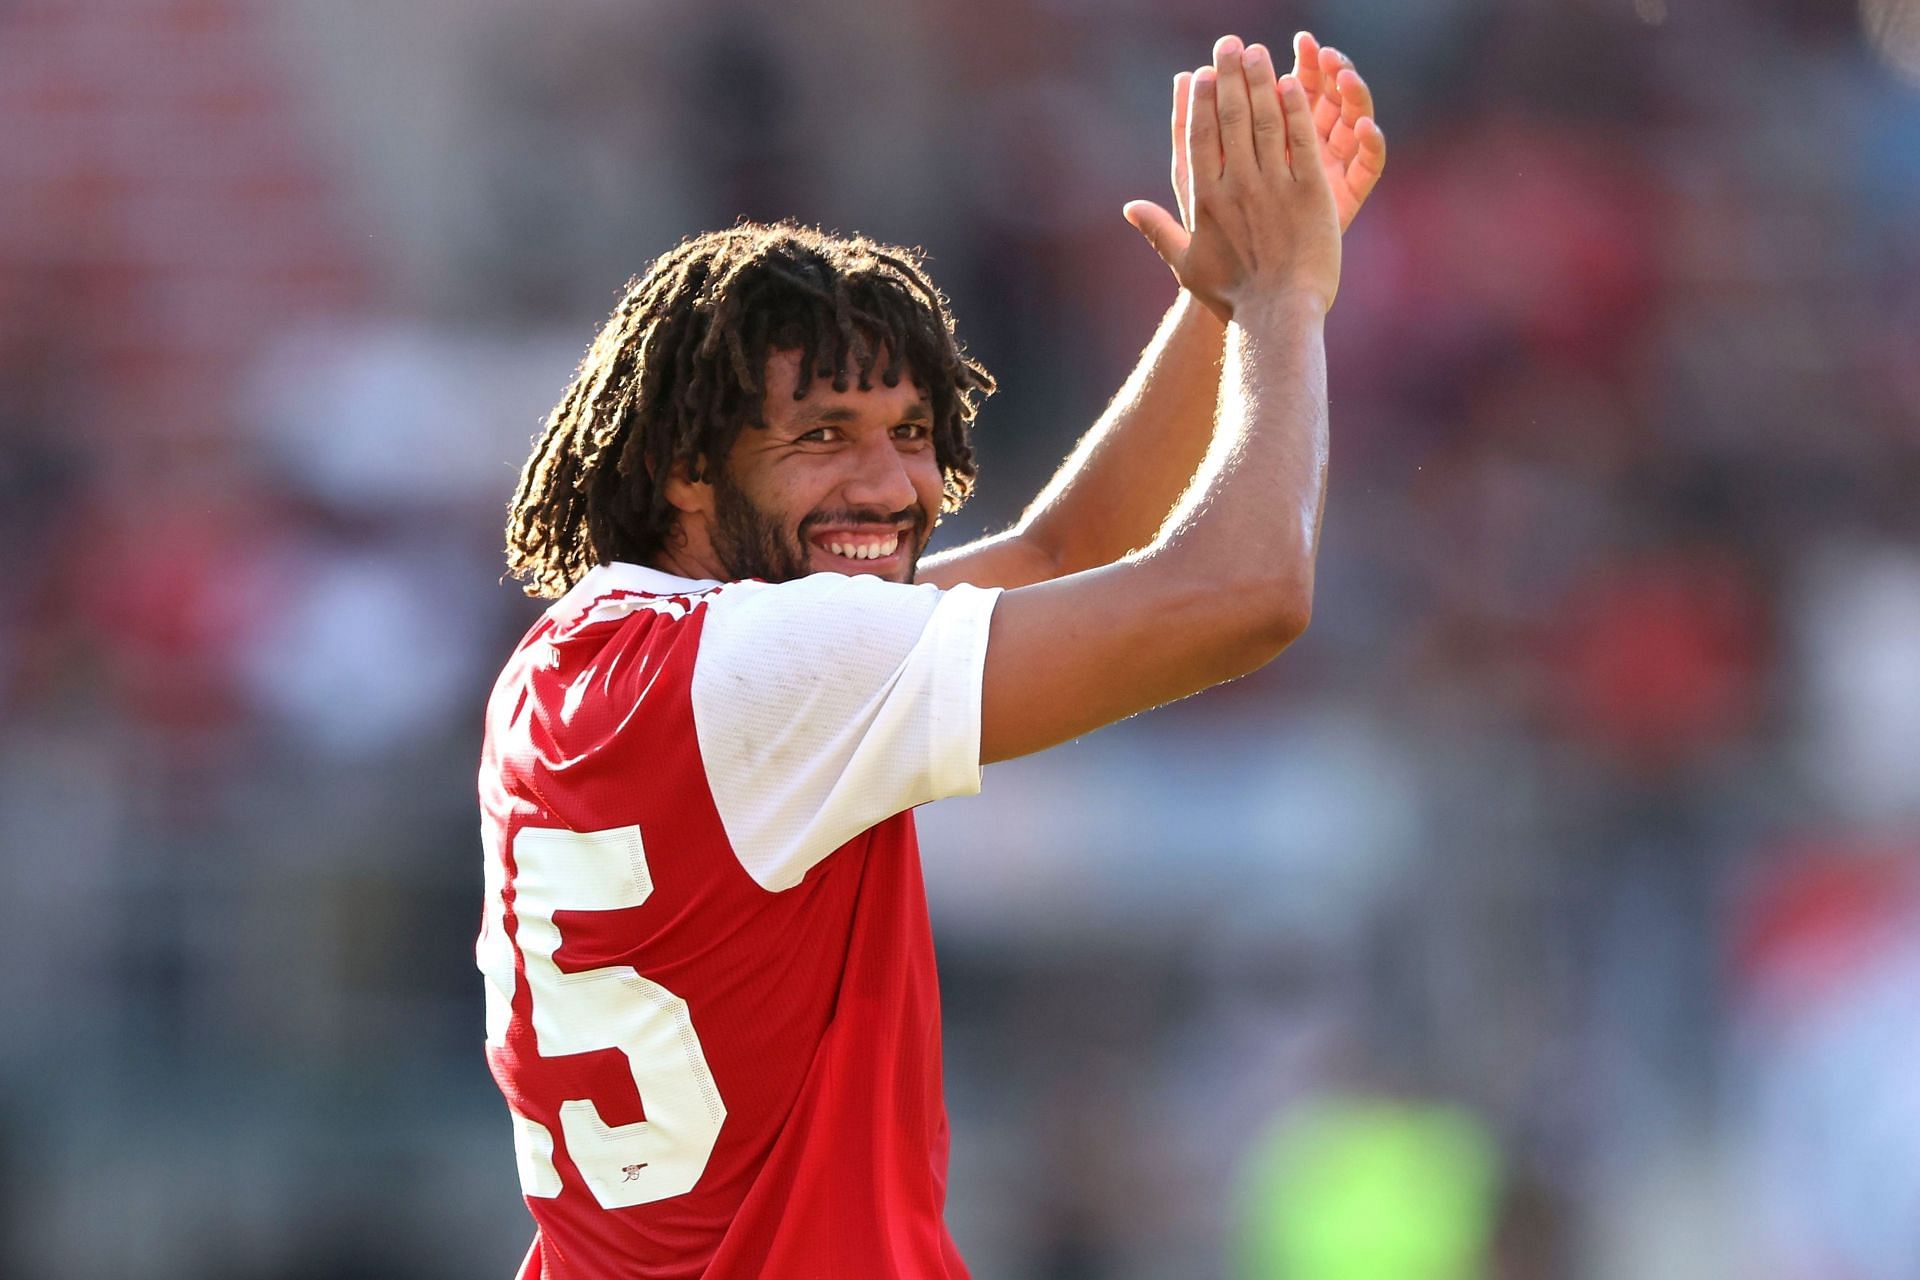 Mohamed Elneny is not linked with an exit from the Emirates right now.